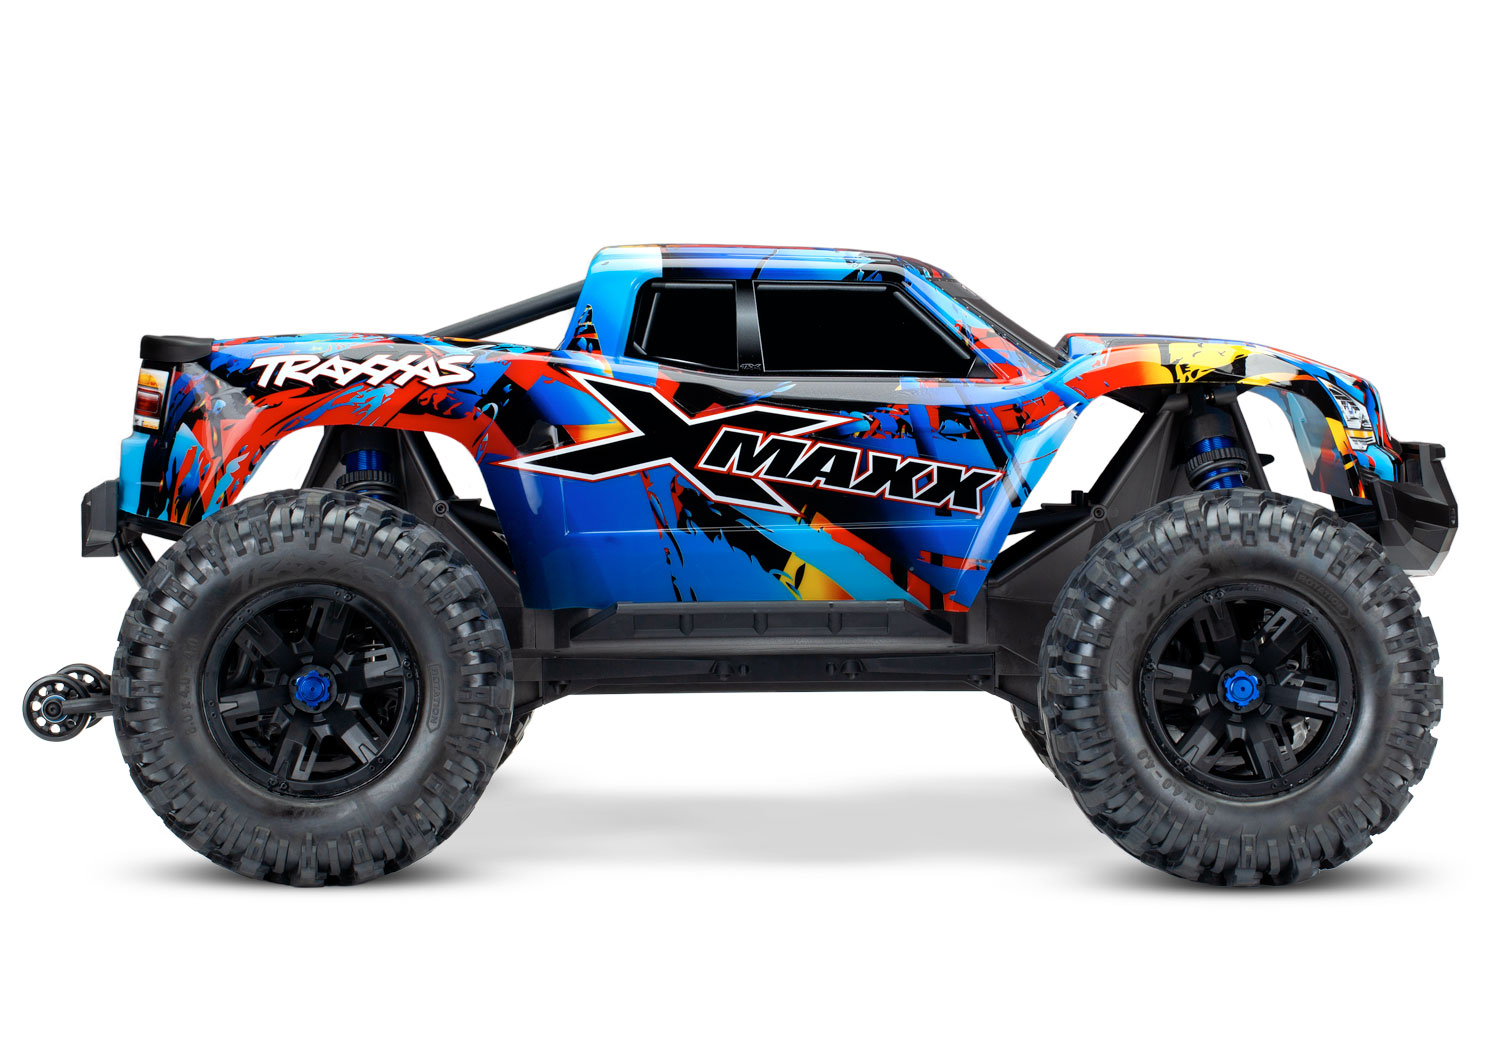 traxxas-77086-4-RnR-2-X-MAXX-4wd-8s-Brushless-Pick-Up-Truck-the-evolution-of-tough-Monstermachine